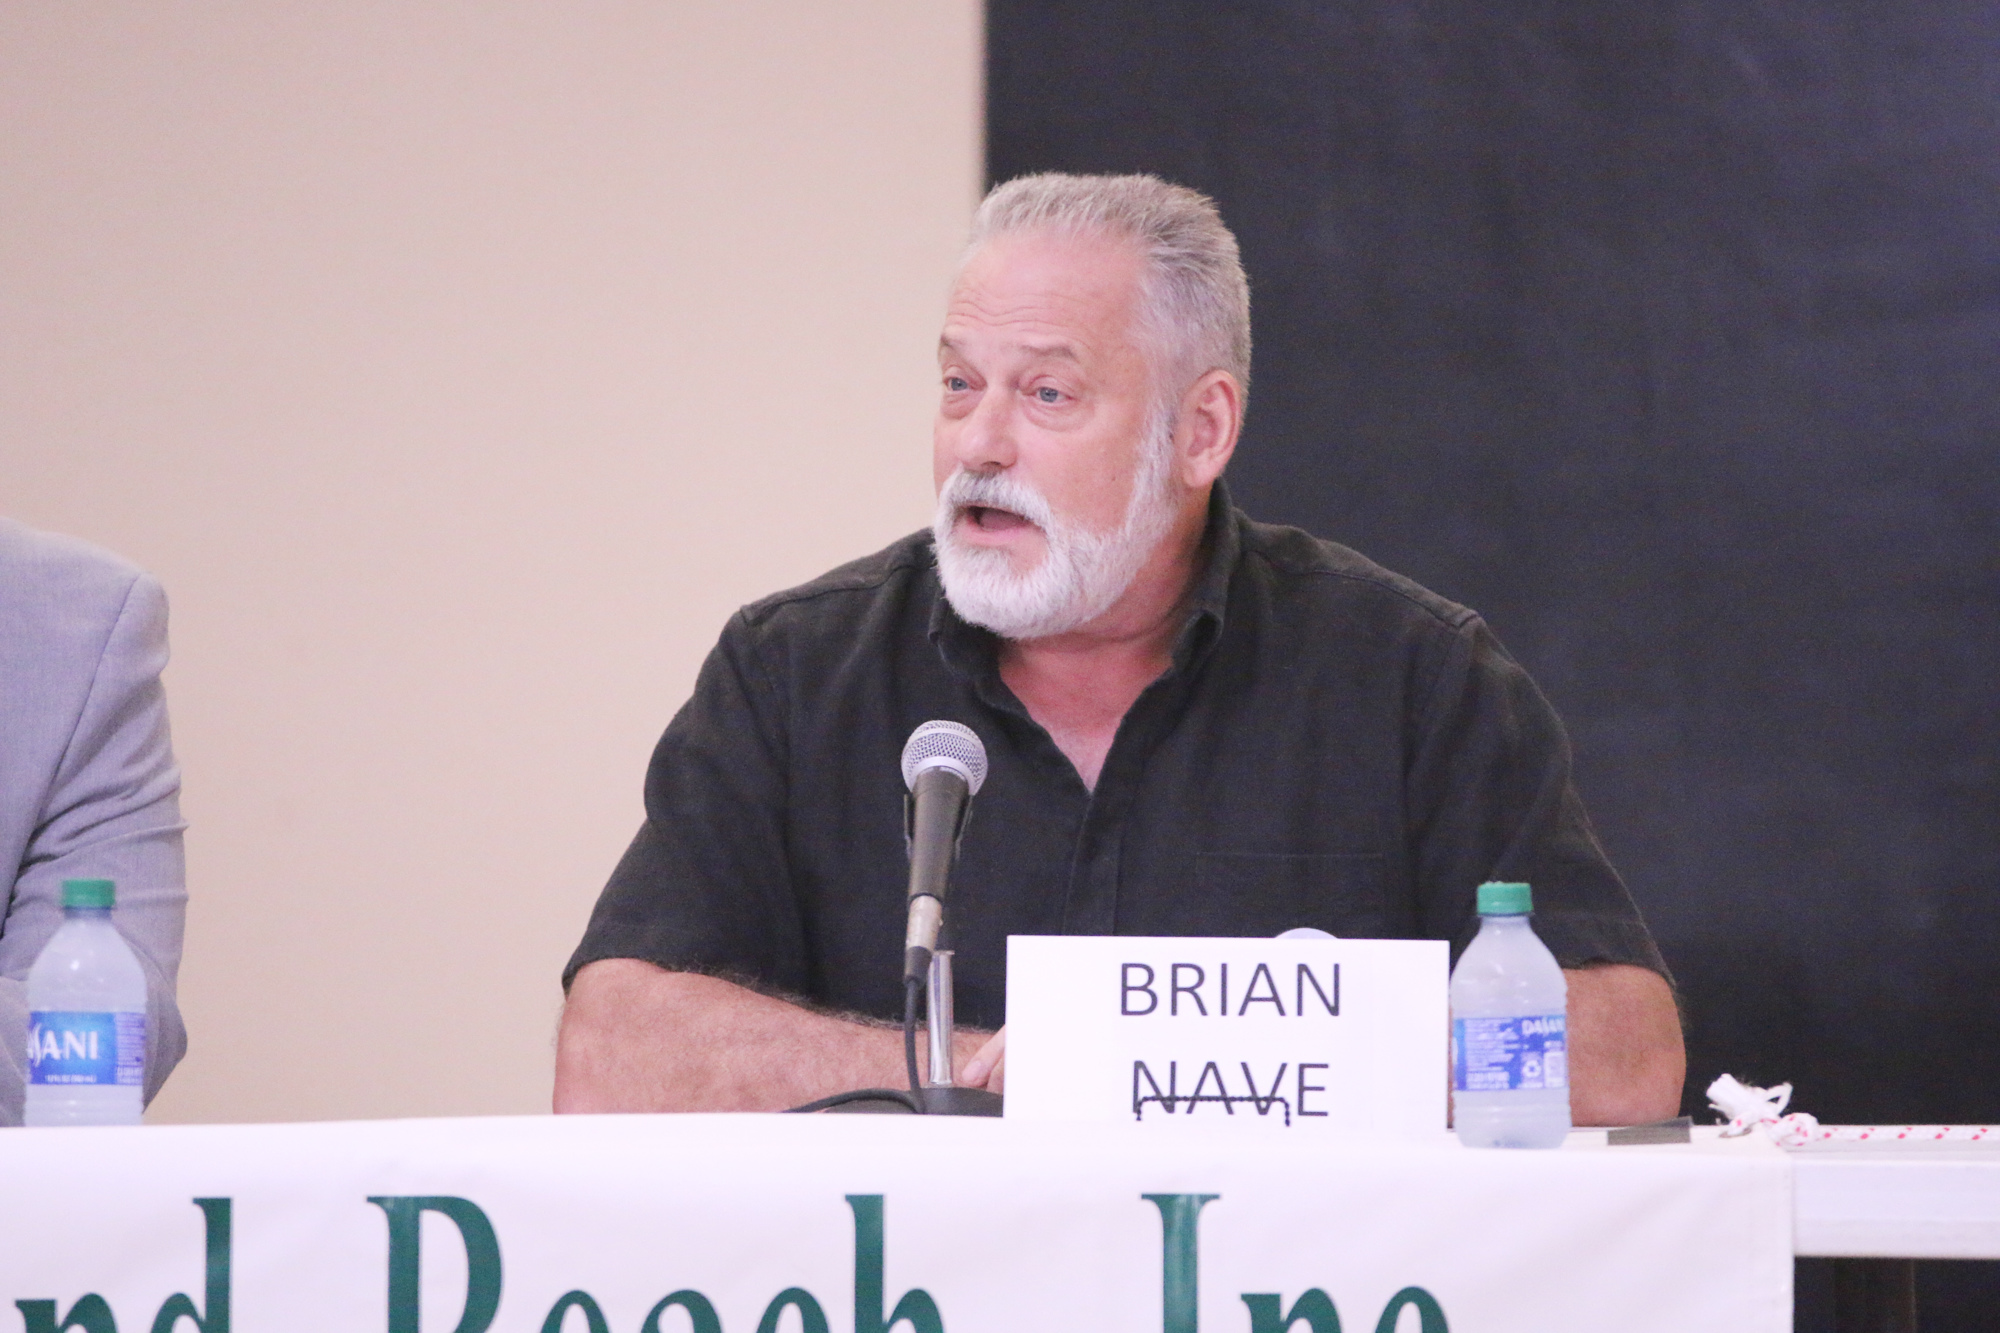 Zone 4 candidate Brian Nave speaks during CFOB's candidate forum on Wednesday, Oct. 12. Photo by Jarleene Almenas